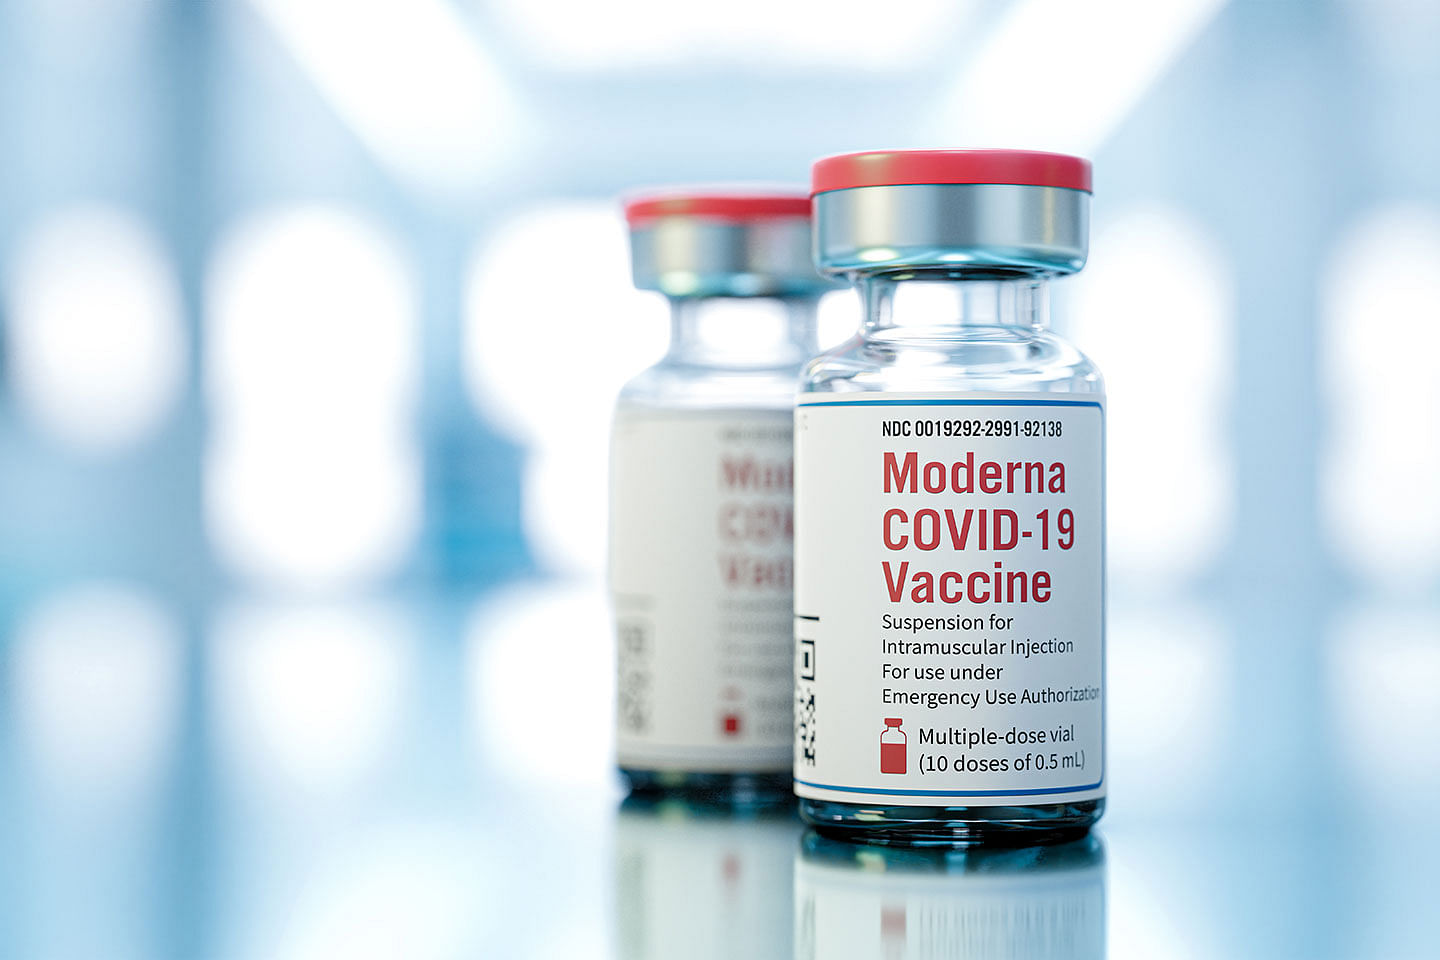 Moderna vaccine is apparently highly effective in adolescents aged 12 - 17.